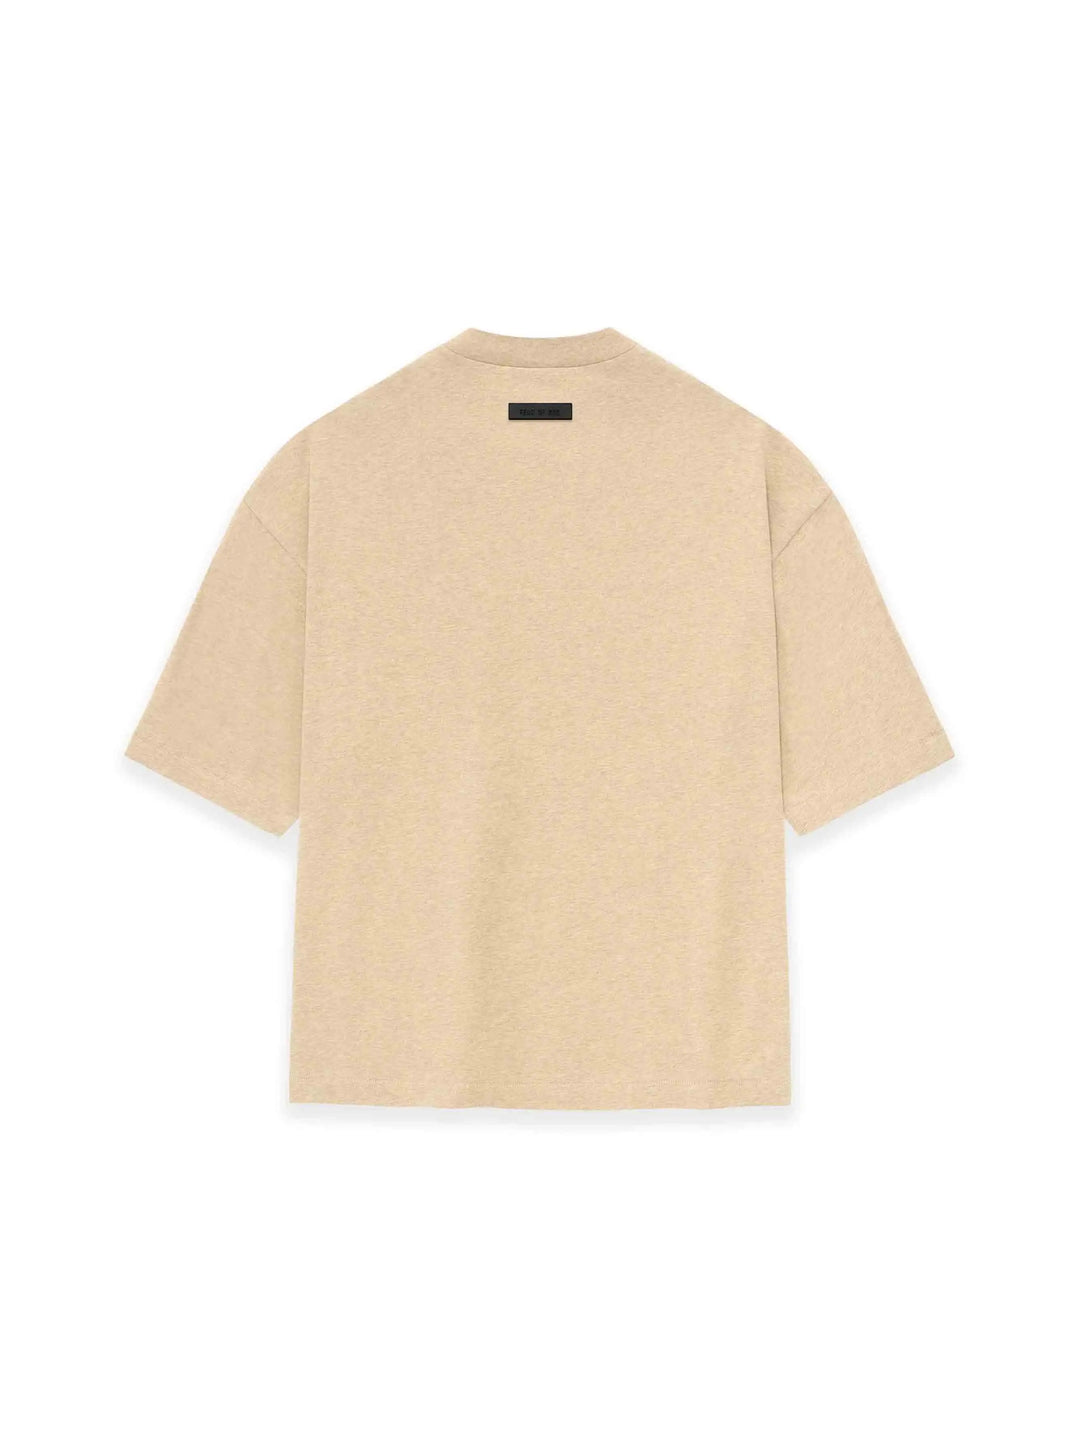 Fear of God Essentials Tee Gold Heather in Auckland, New Zealand - Shop name